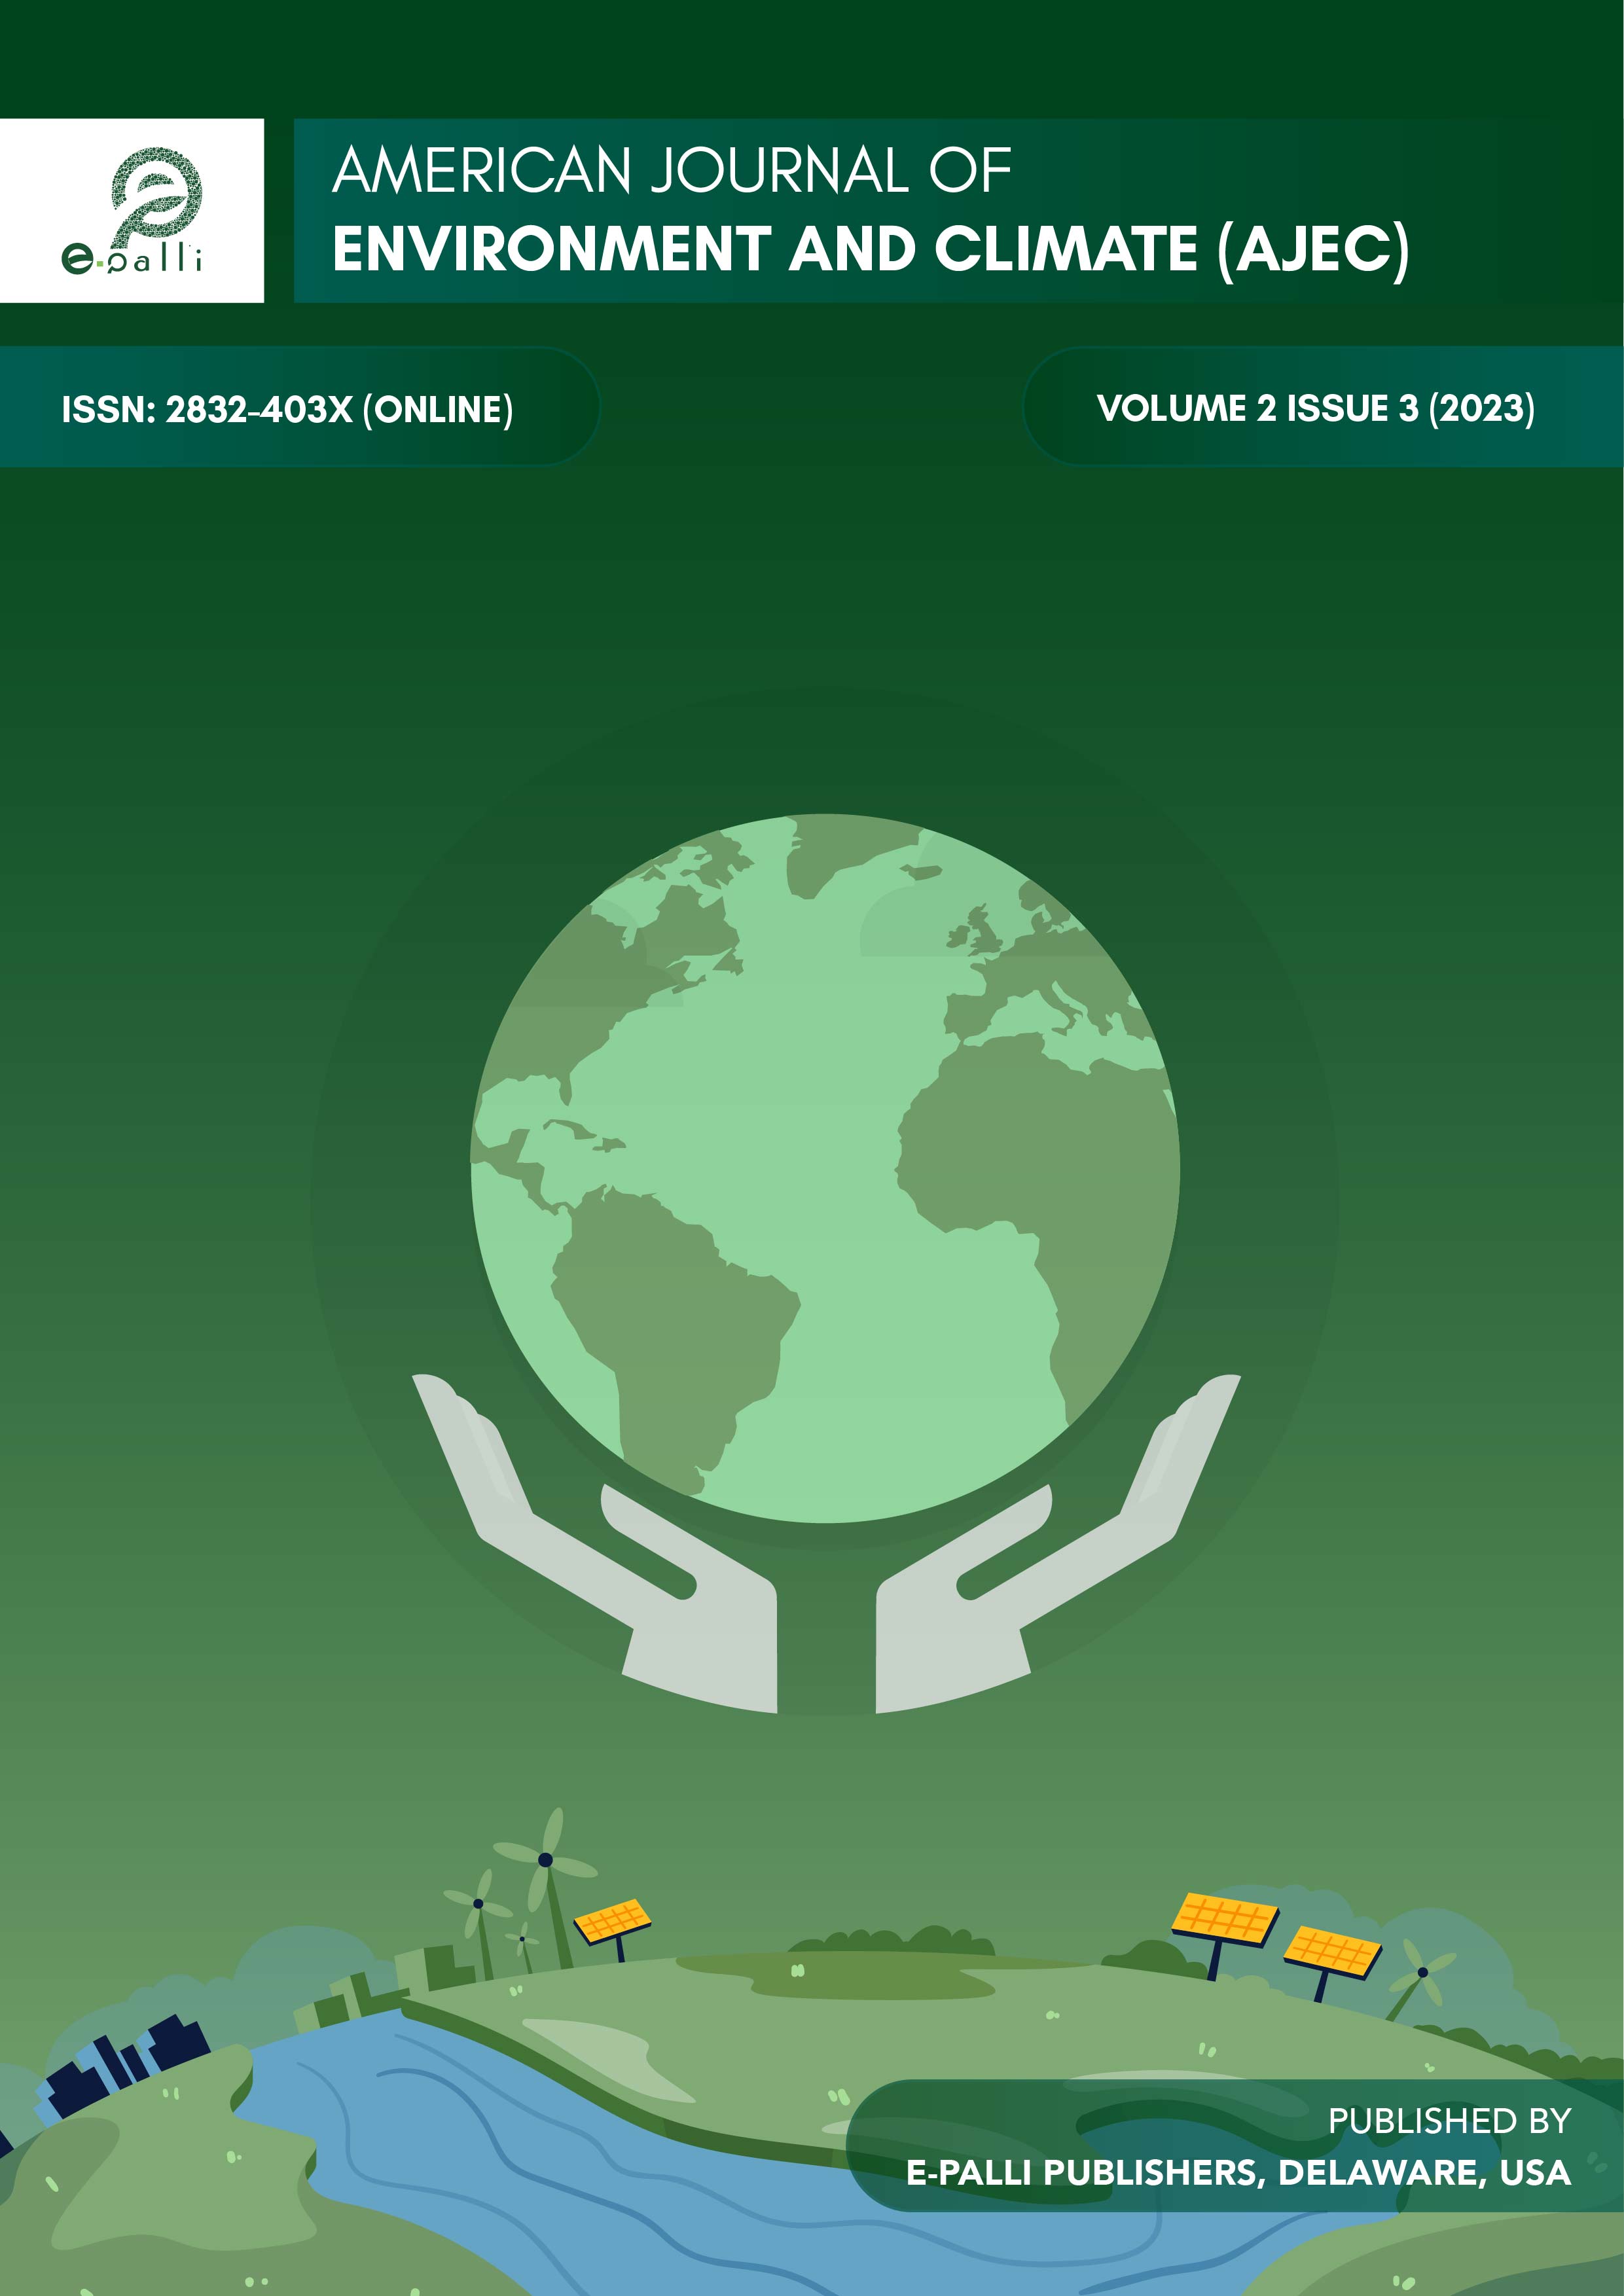 					View Vol. 2 No. 3 (2023): American Journal of Environment and Climate
				